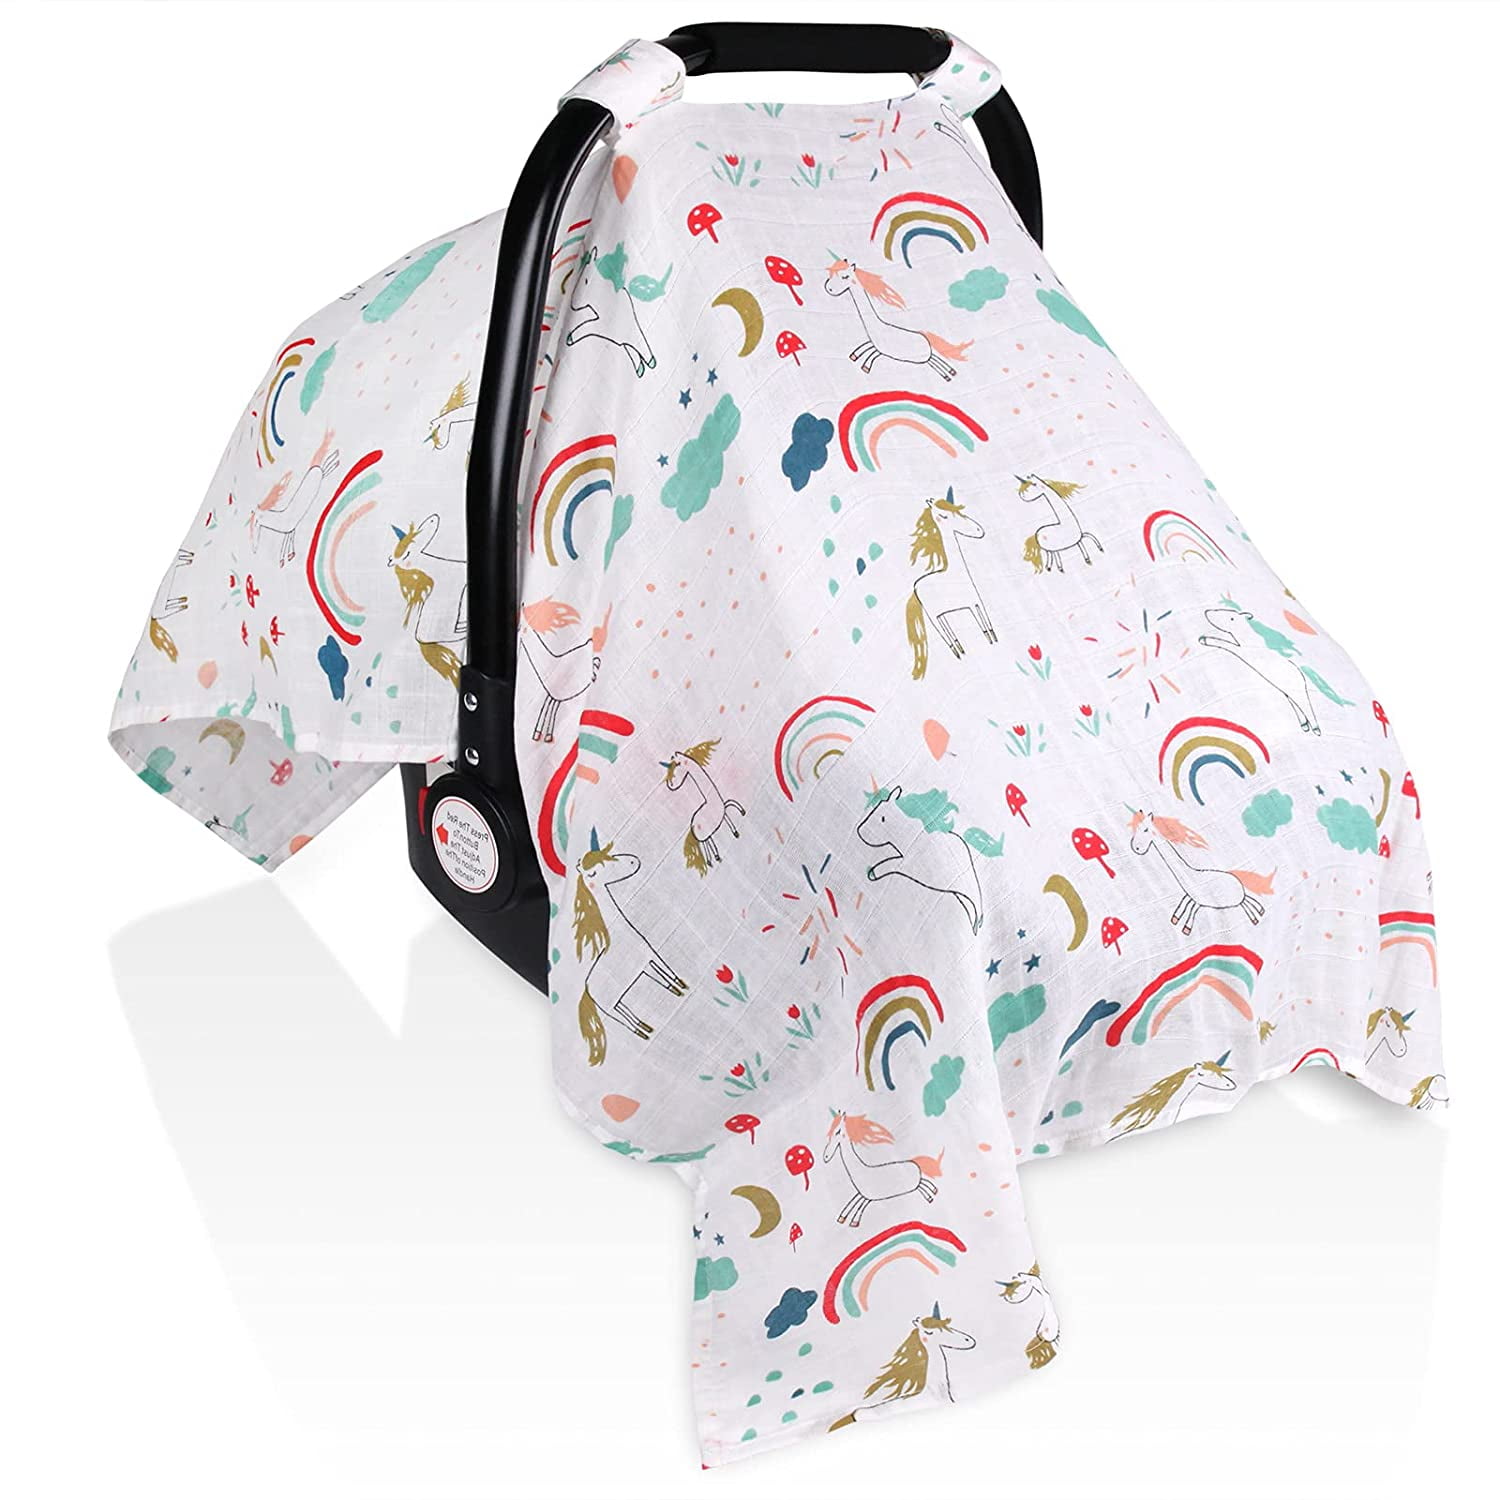 Plant Newborn Summer Stroller Canopies Muslin Cotton Infant Carseat Canopy Lightweight Breathable Carrier Cover for Babies Baby Car Seat Covers for Boys Girls 